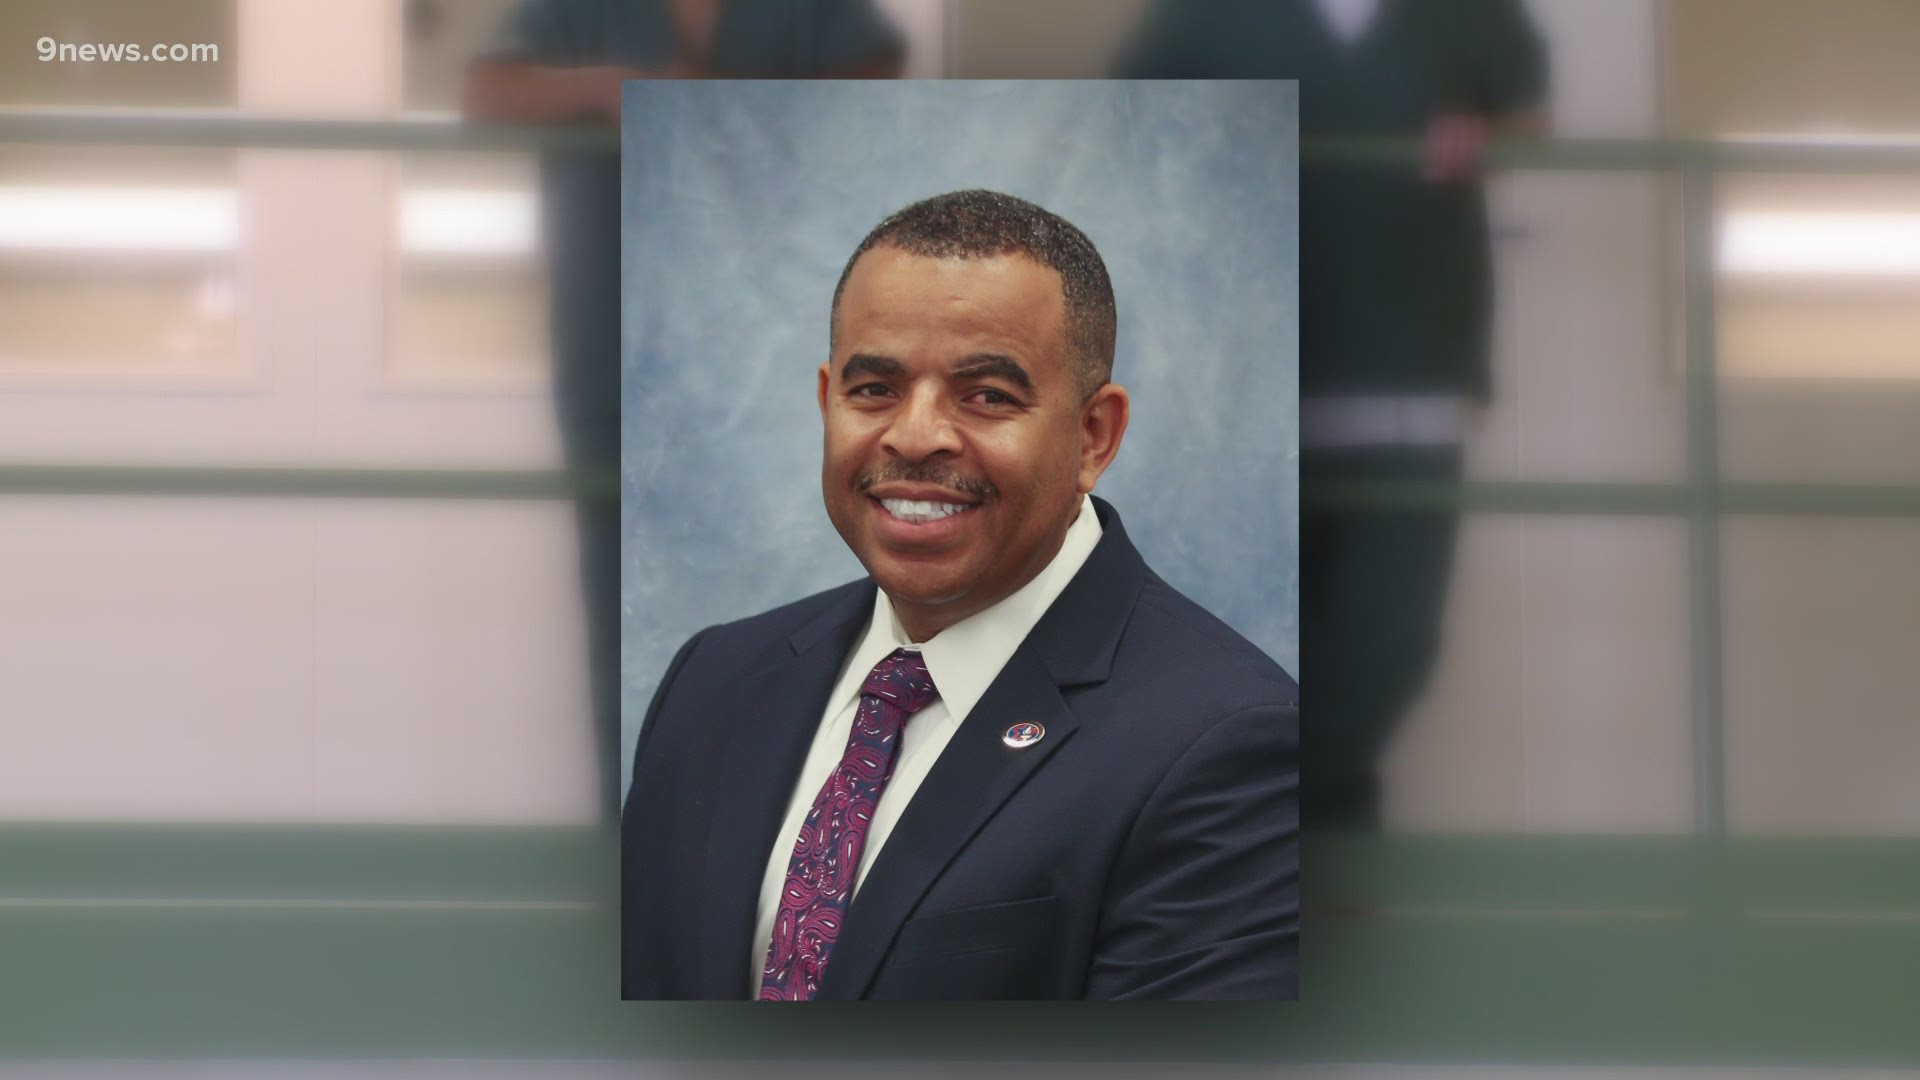 Diggins' appointment as leader of the Denver Sheriff Department comes almost 10 months after the resignation of the previous sheriff.